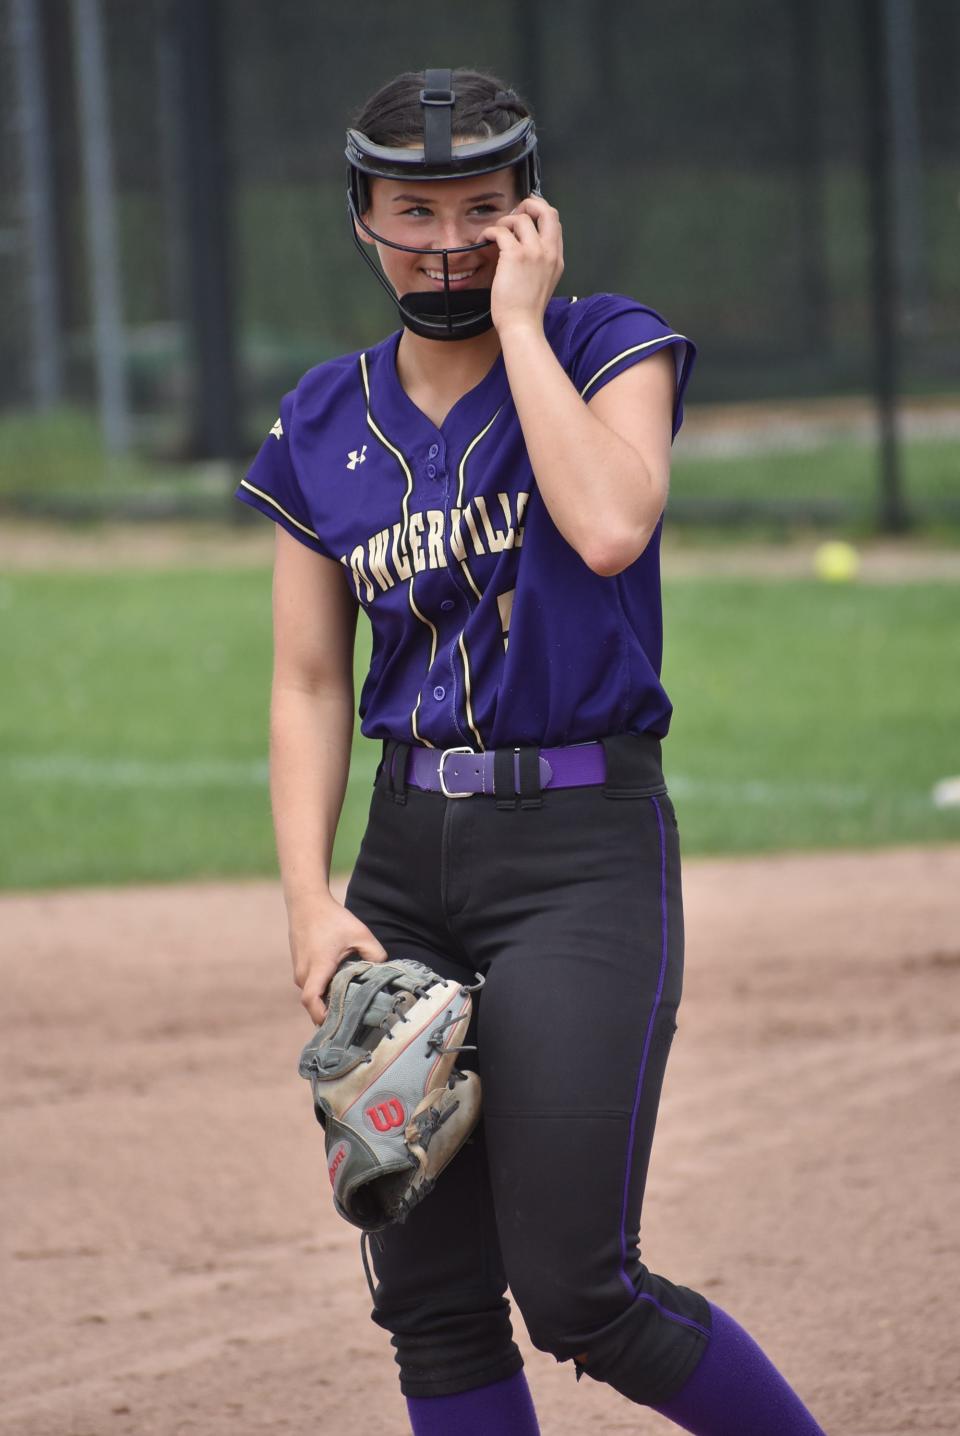 Tori Briggs led Fowlerville with a .553 batting average in 2022.